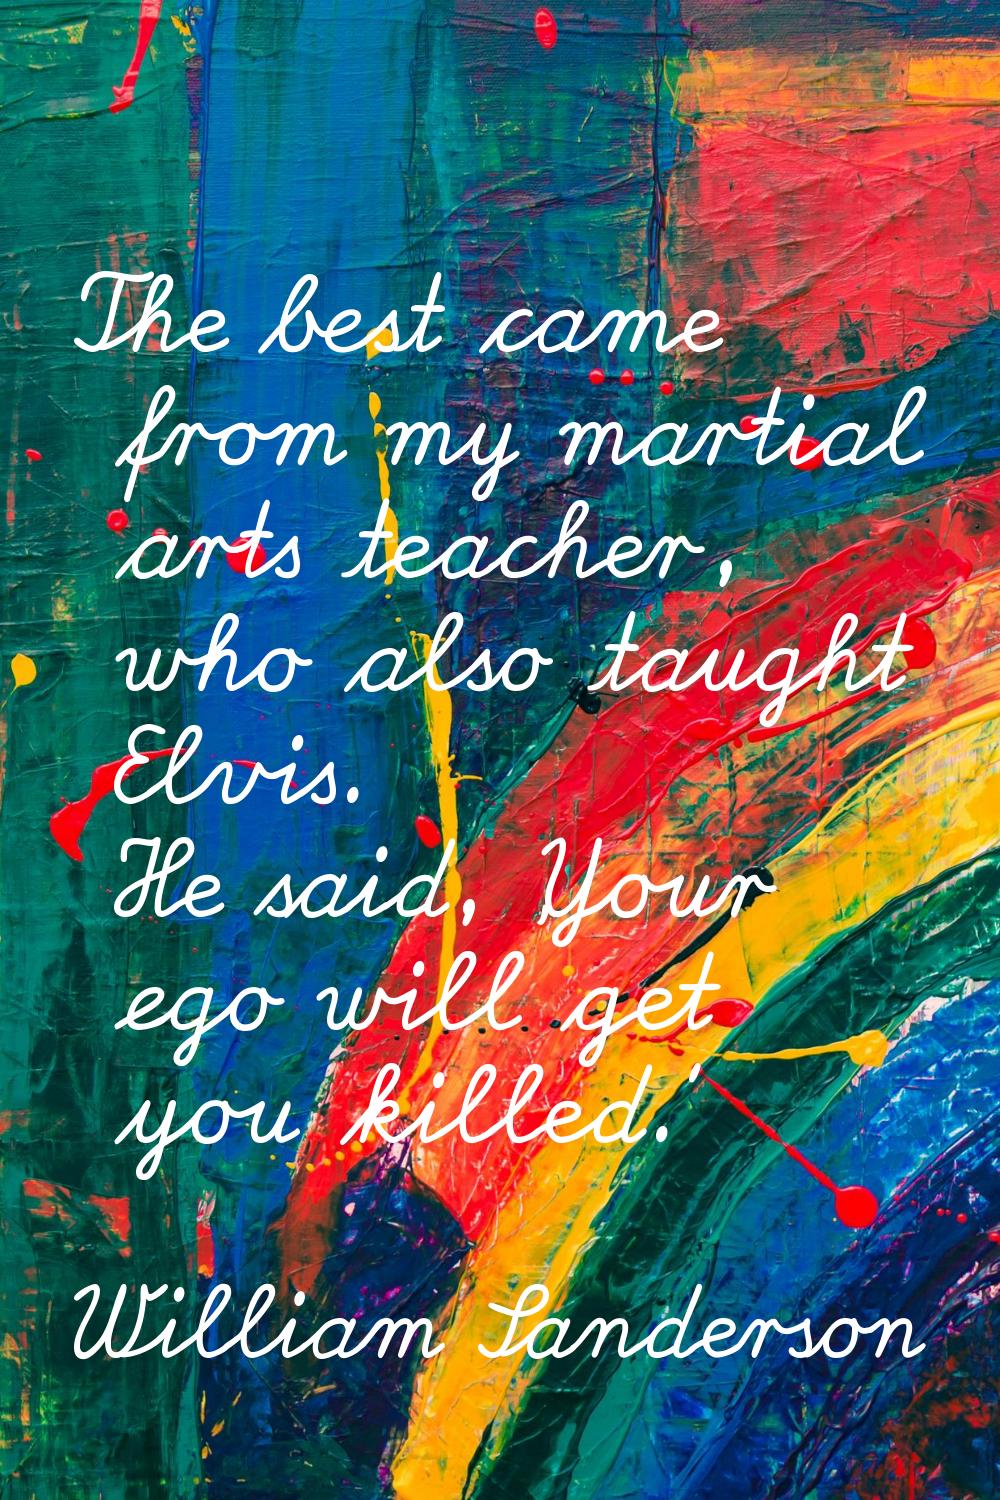 The best came from my martial arts teacher, who also taught Elvis. He said, 'Your ego will get you 